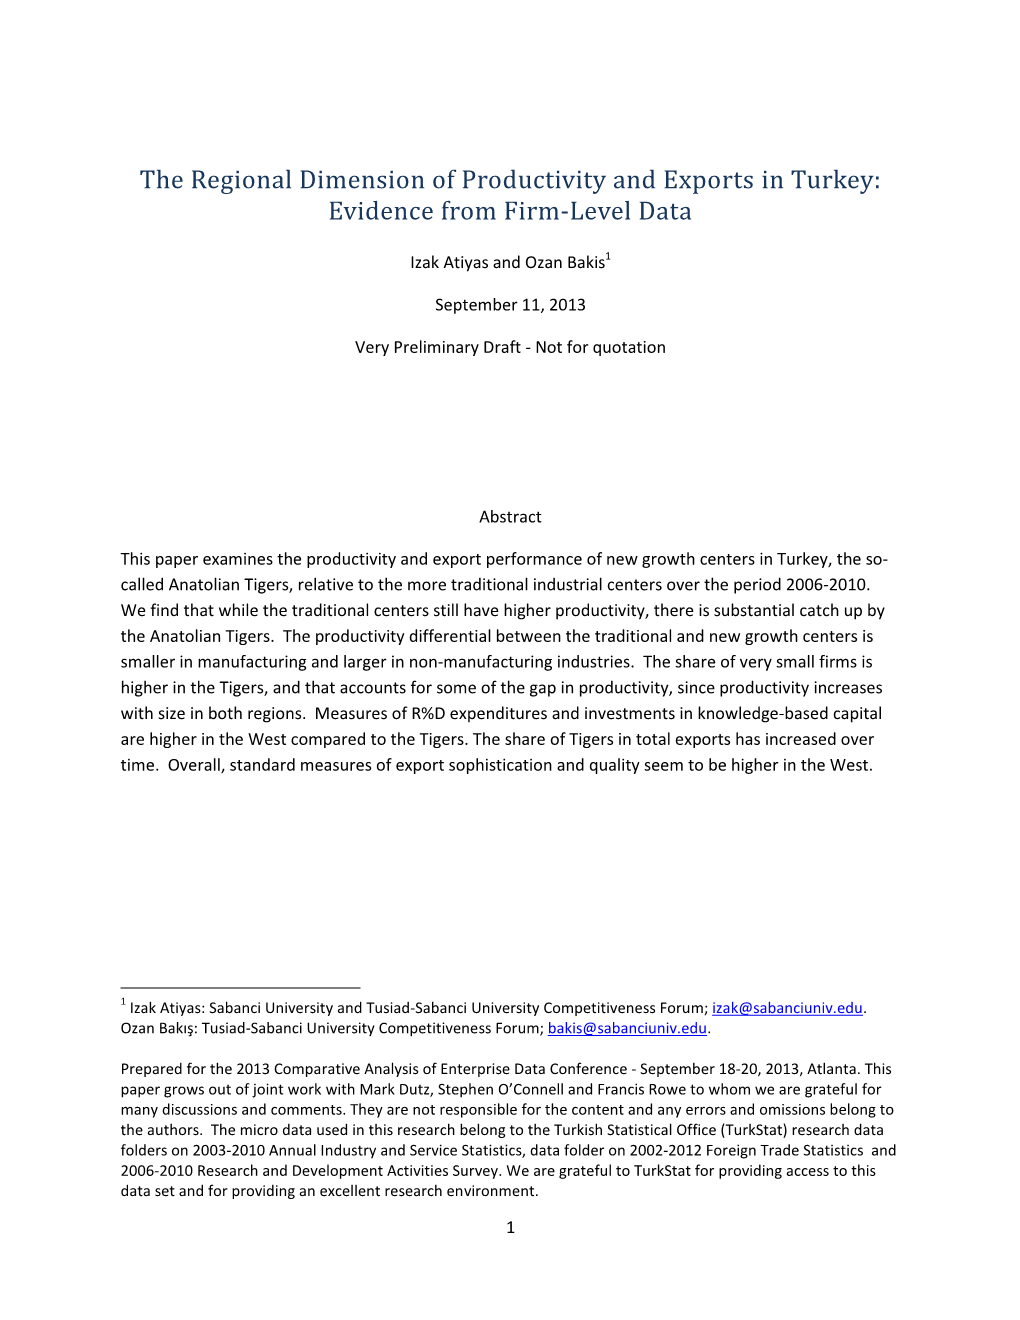 The Regional Dimension of Productivity and Exports in Turkey: Evidence from Firm-Level Data